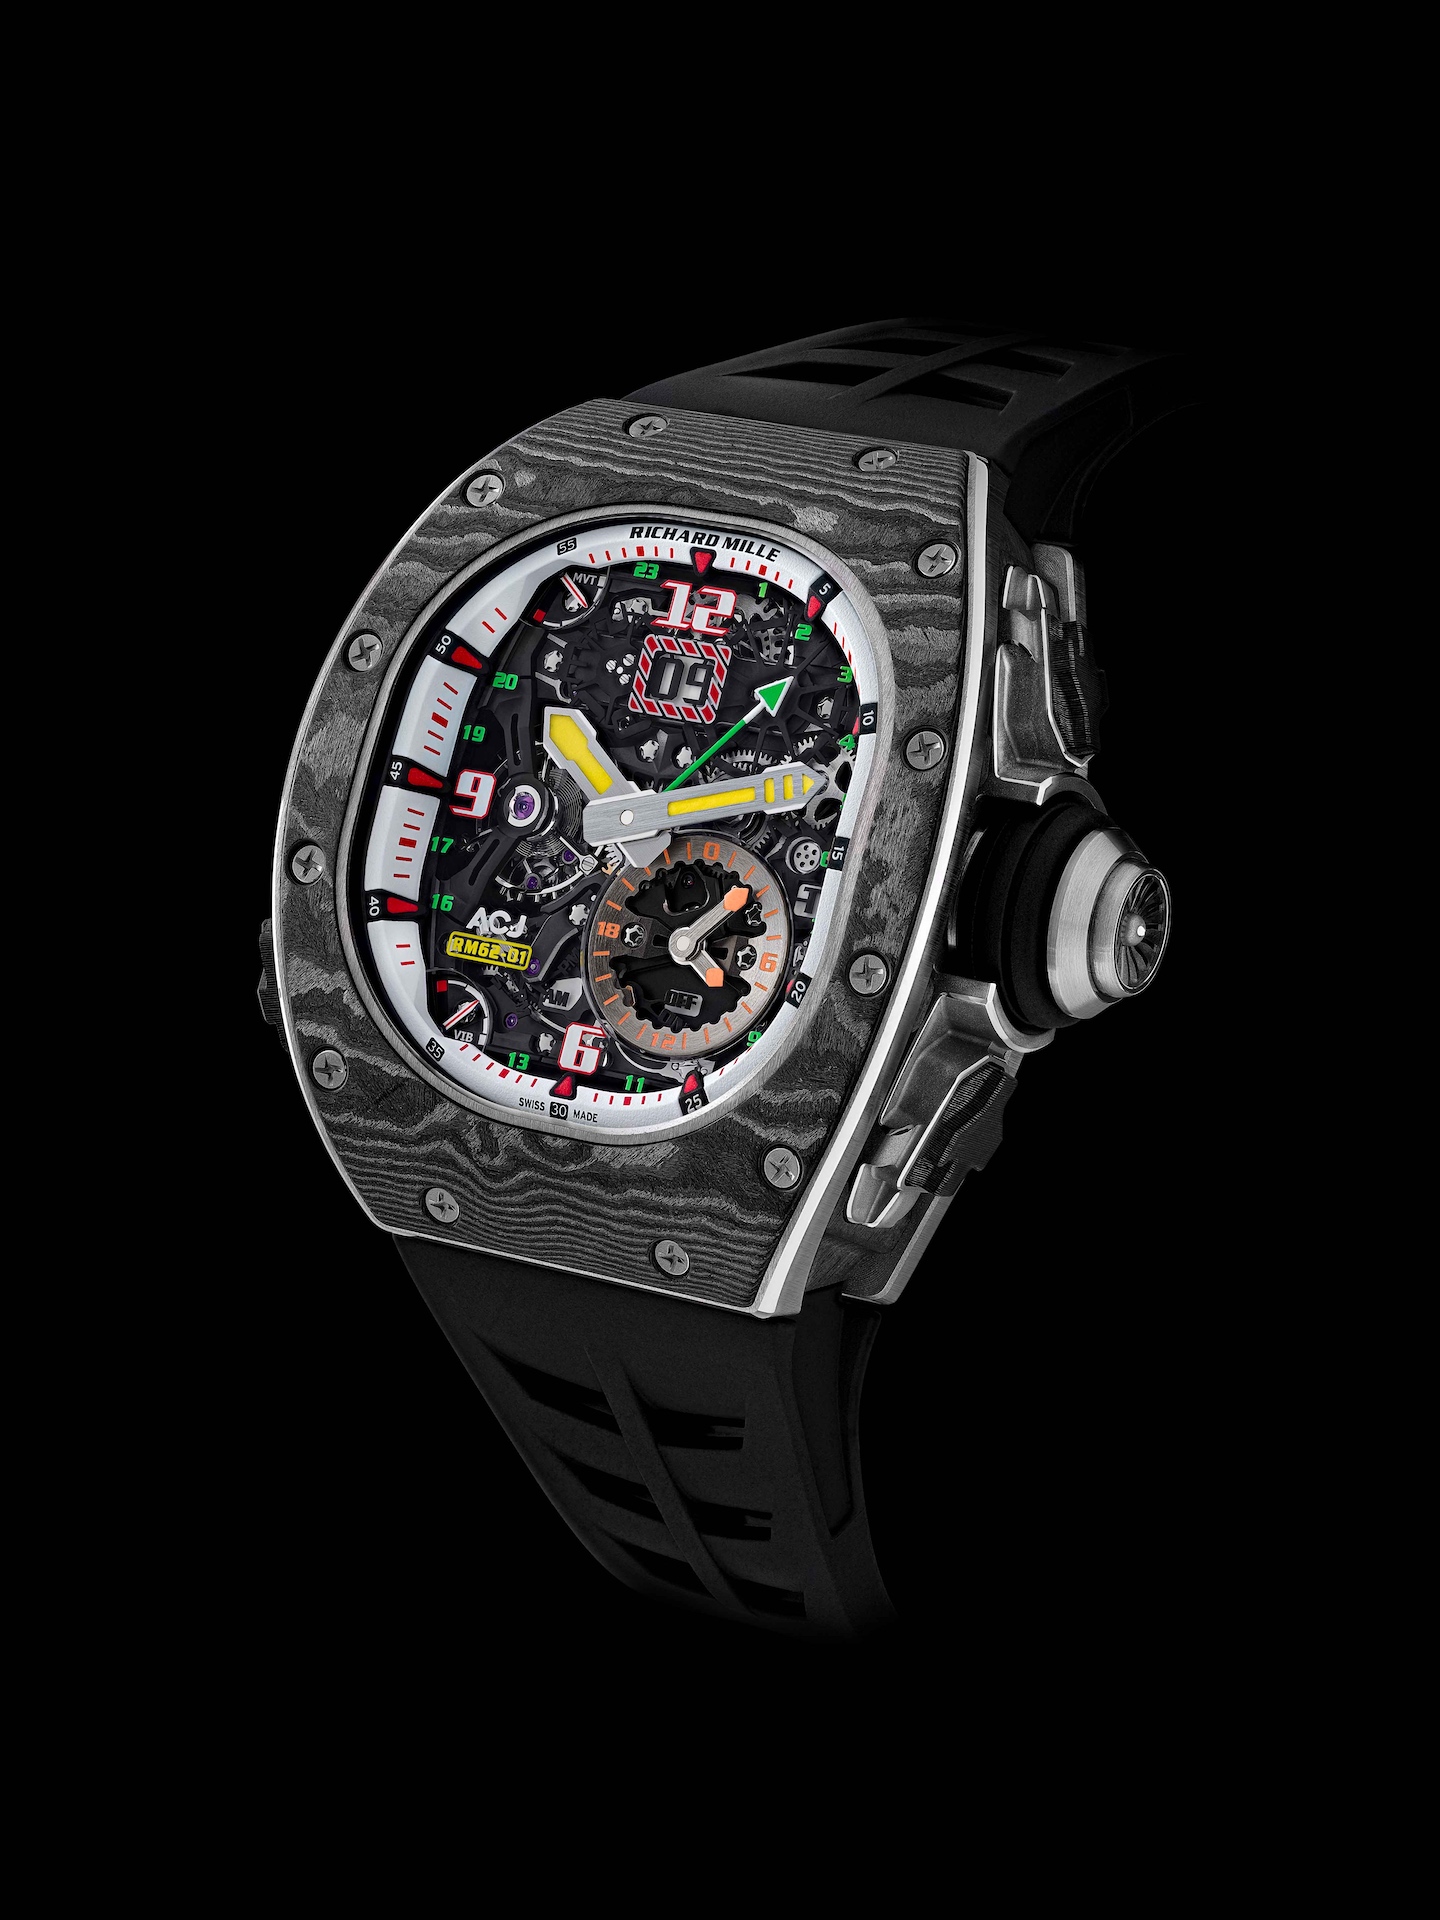 Richard Mille Launches New Travel-Watch Inspired By Airbus Corporate Jets